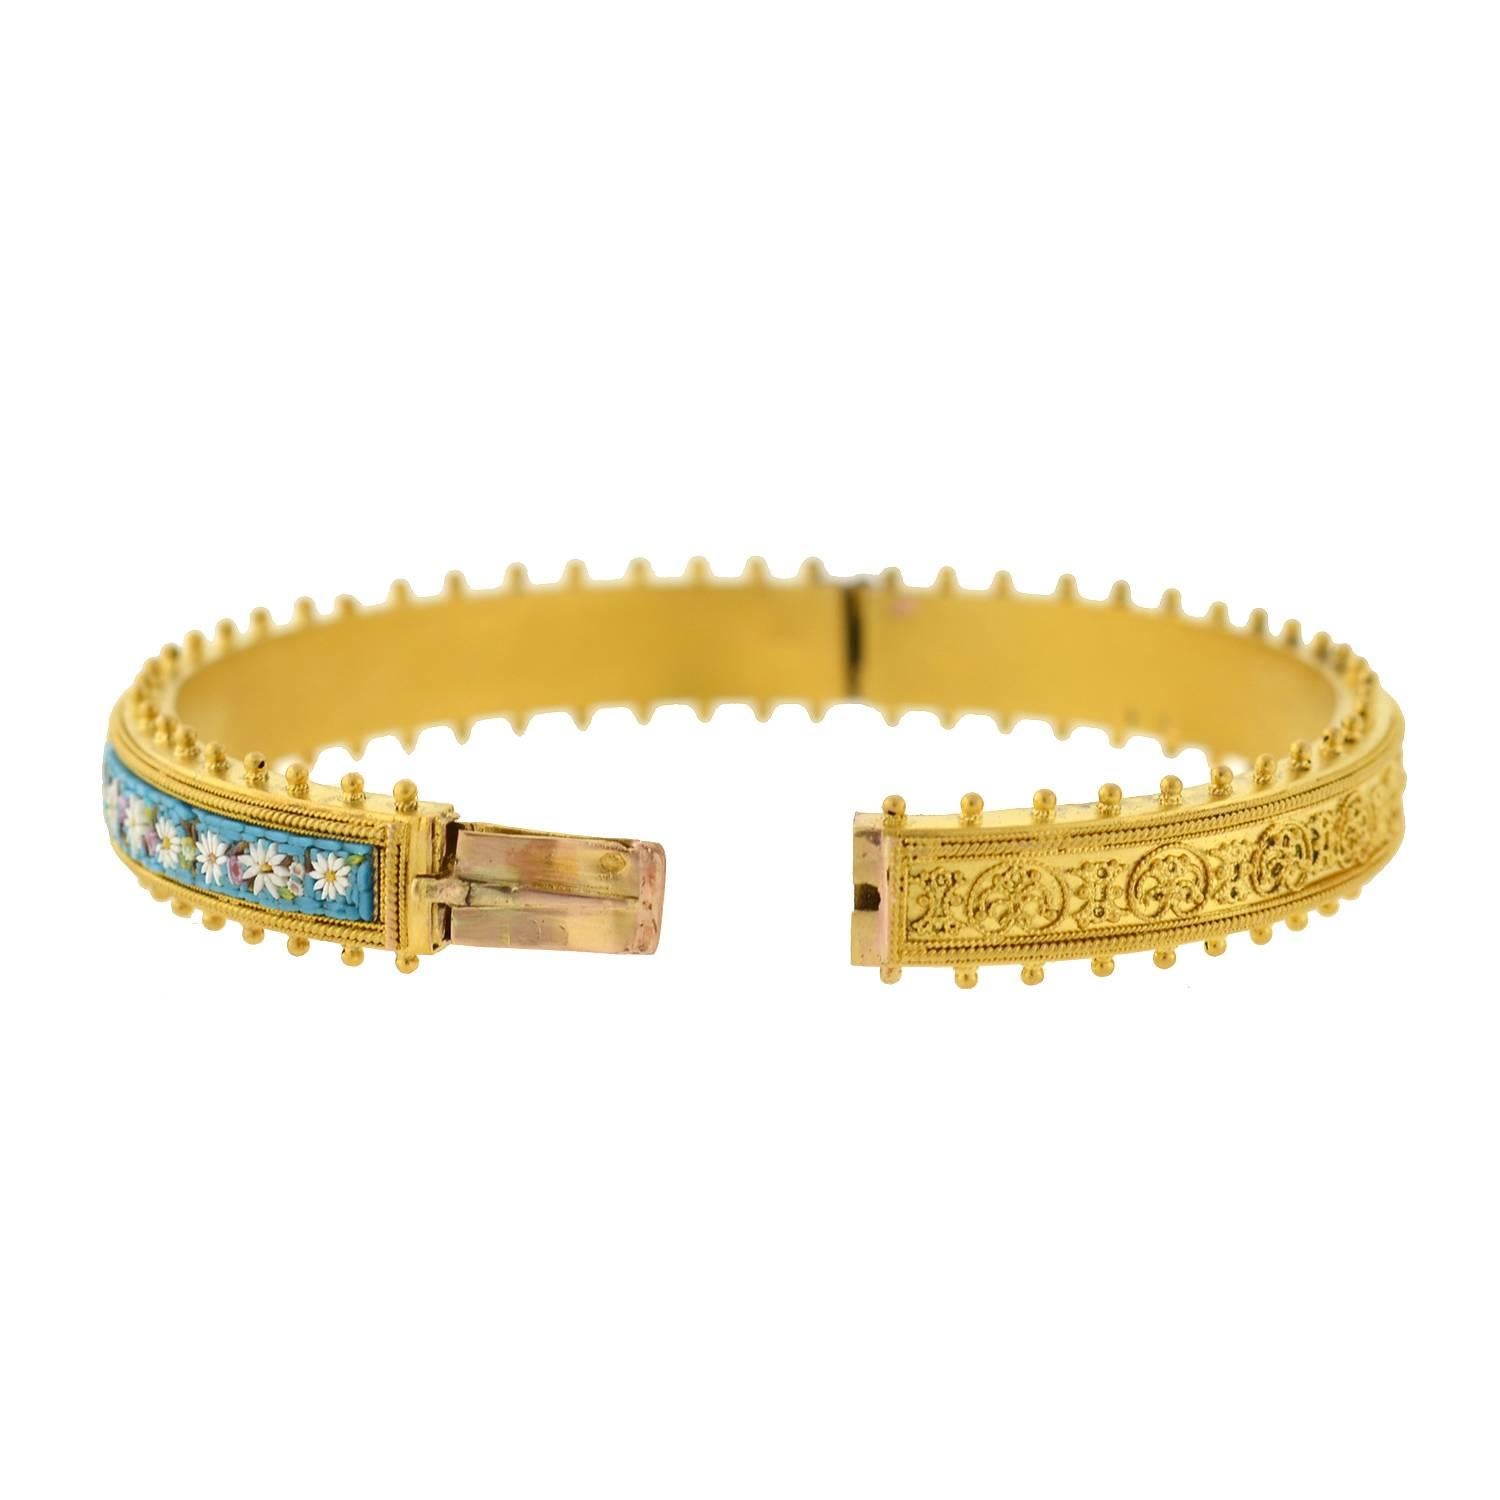 An exceptional micro mosaic bracelet from the Victorian (ca1880) era! Made of vibrant 15kt gold, this slim bangle displays an incredible micro mosaic design on one side, and an Etruscan wirework motif on the other. The micro mosaic craftsmanship is